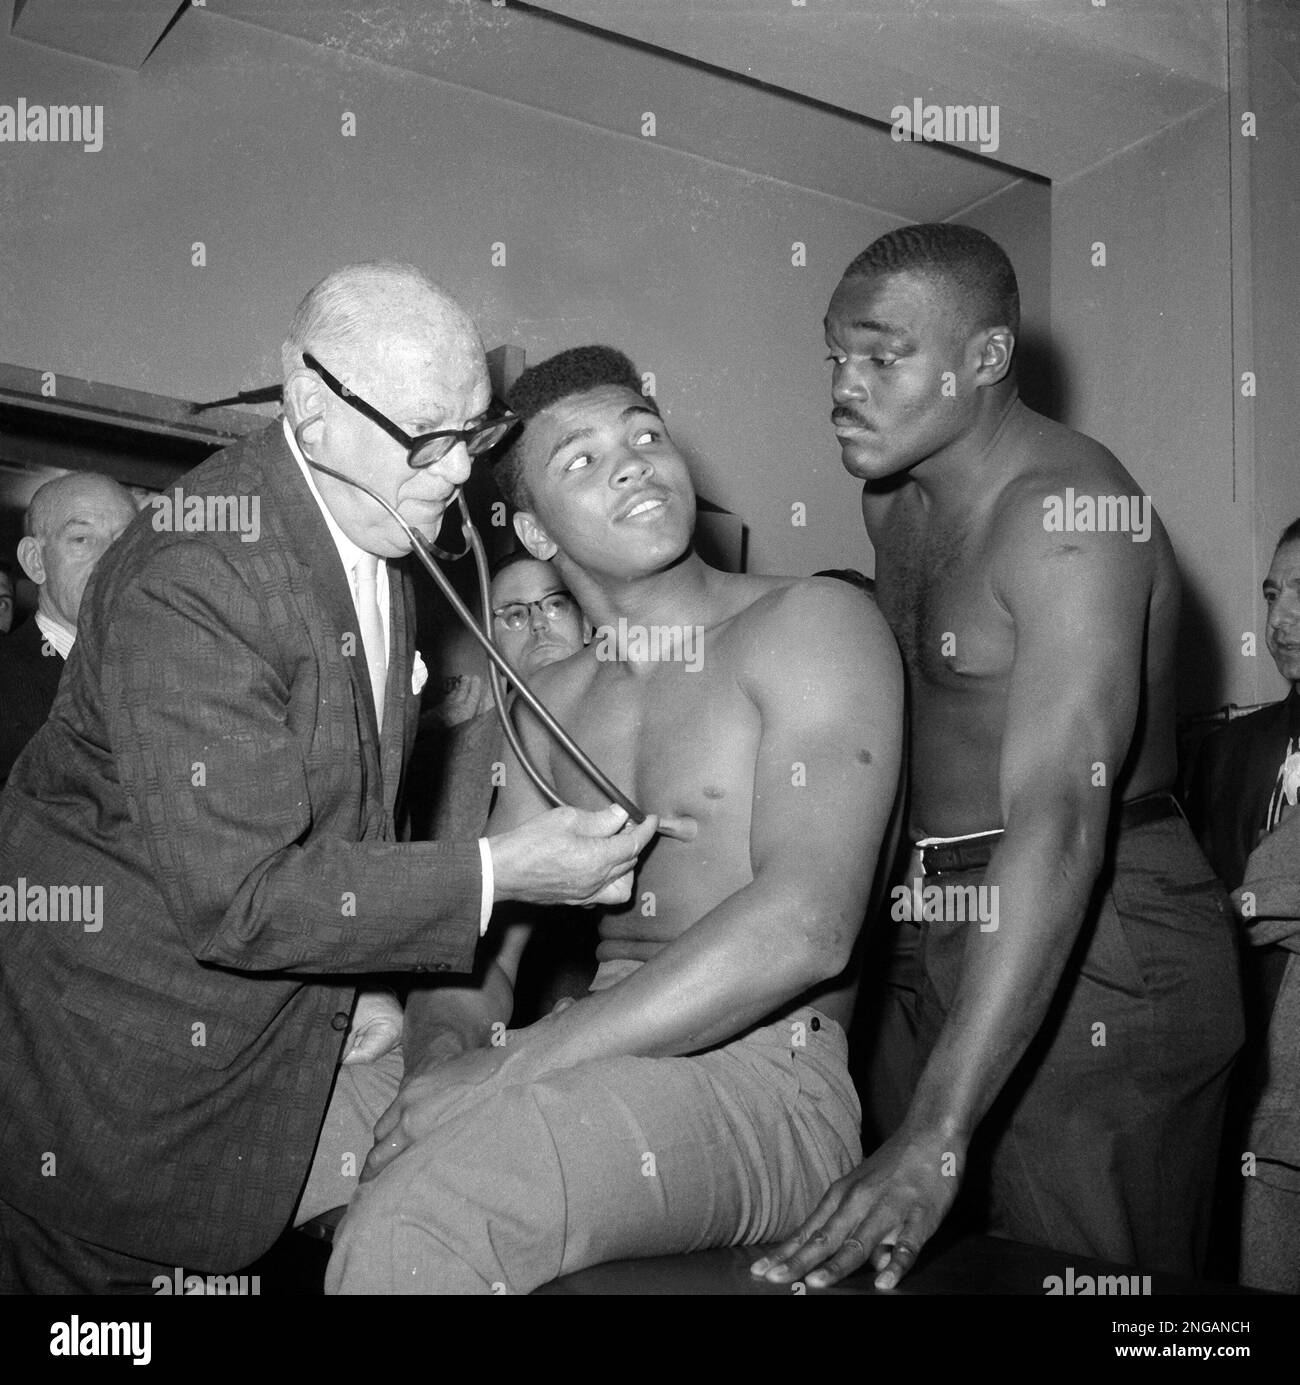 Heavyweight boxer Cassius Clay is examined by Dr. Samuel Swetnick of the  New York State Athletic Commission, as Clay and Doug Jones eye each other,  March 8, 1963, in New York. Clay,